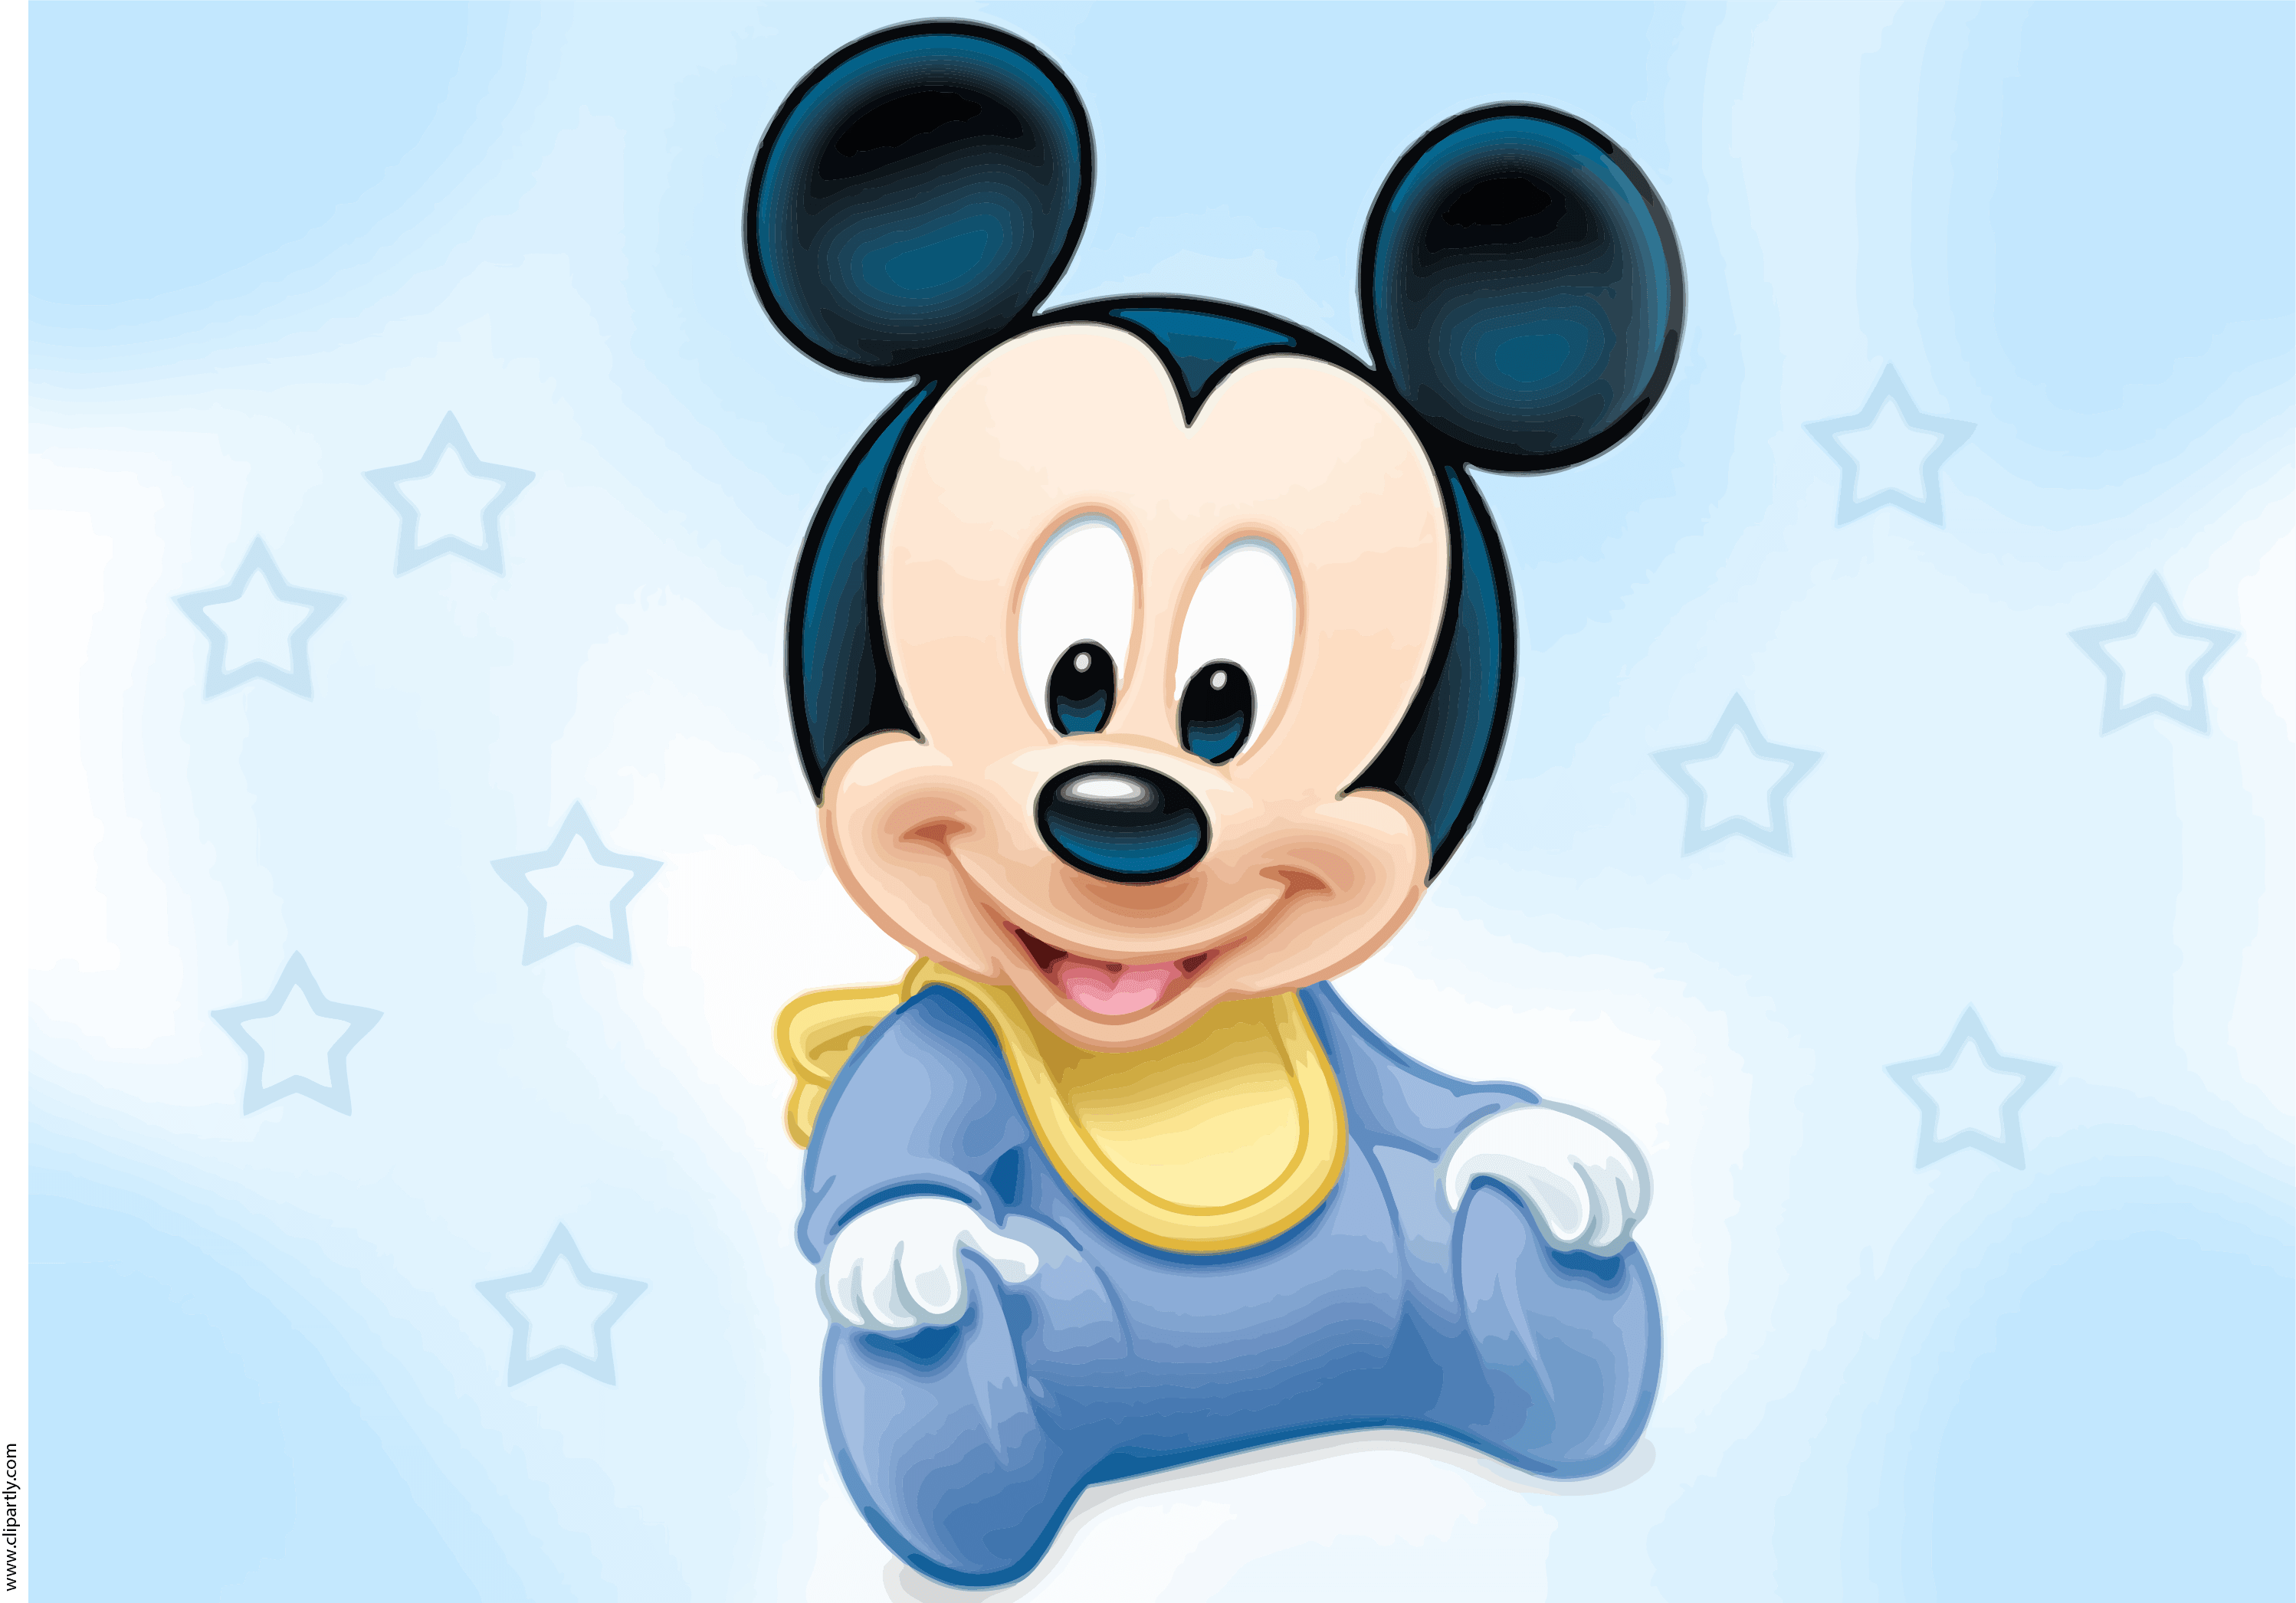 Baby Mickey Mouse Wallpapers